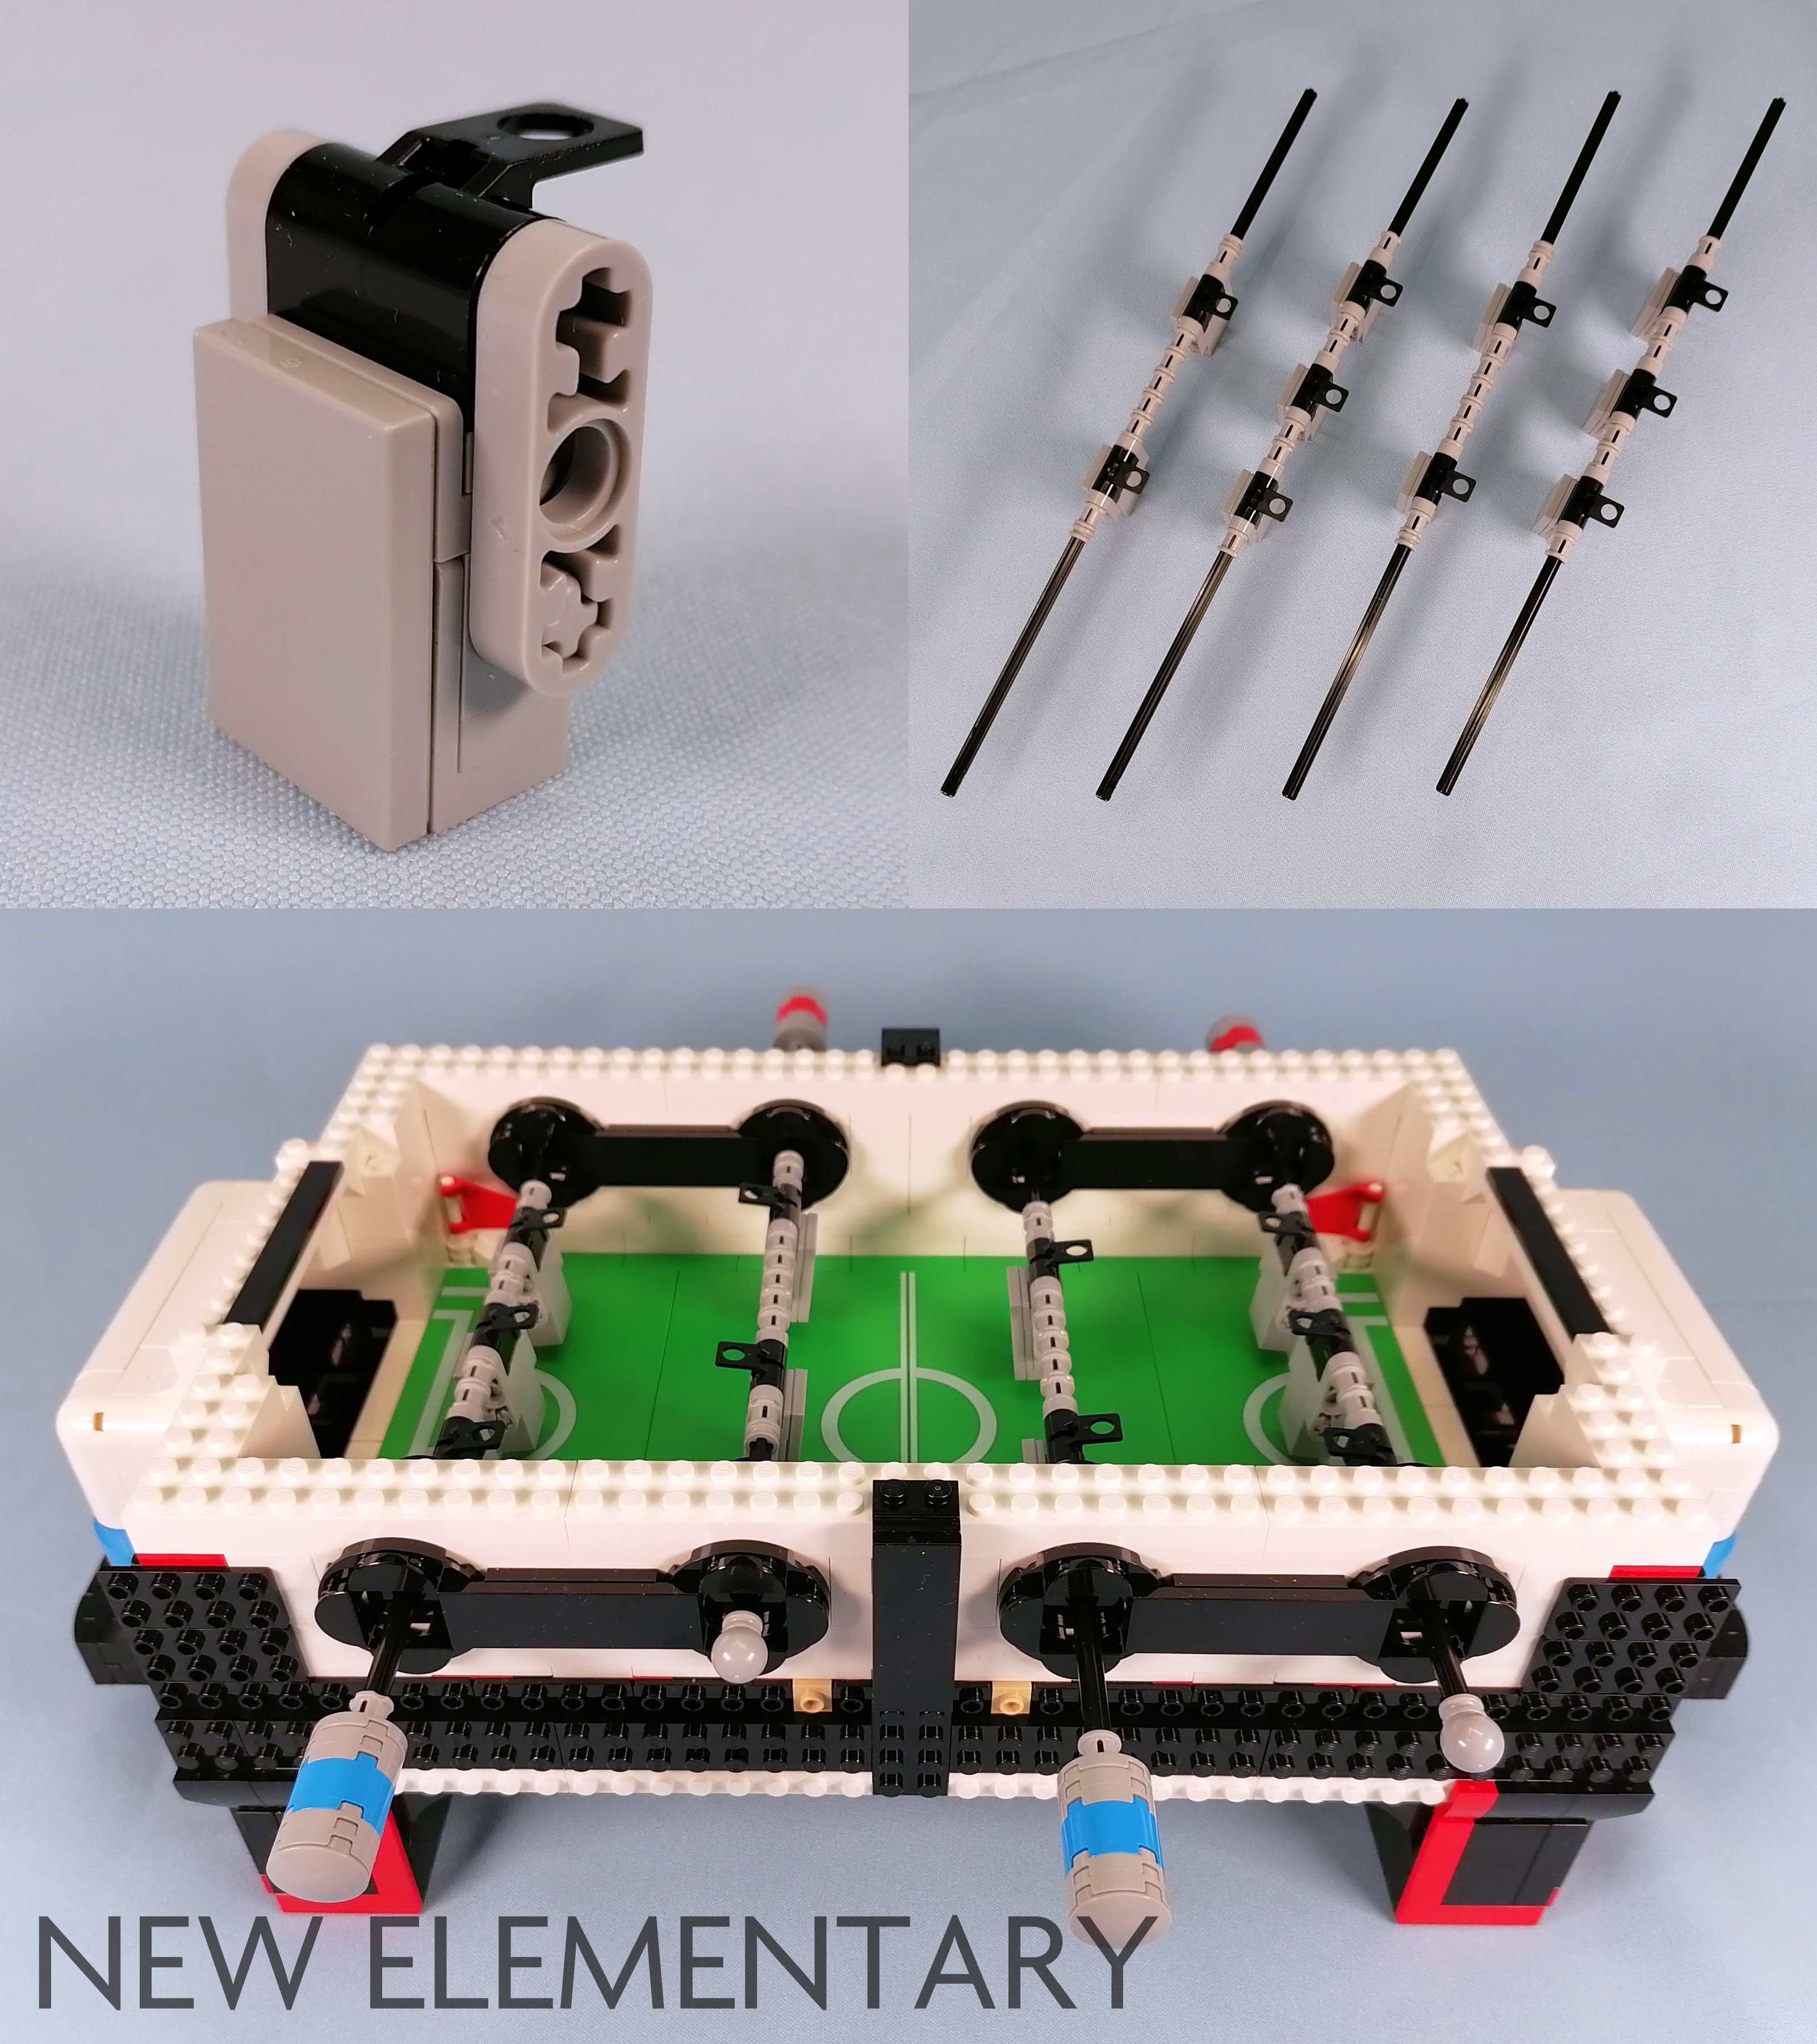 piece usage - Can Lego soccer (football) parts be used for